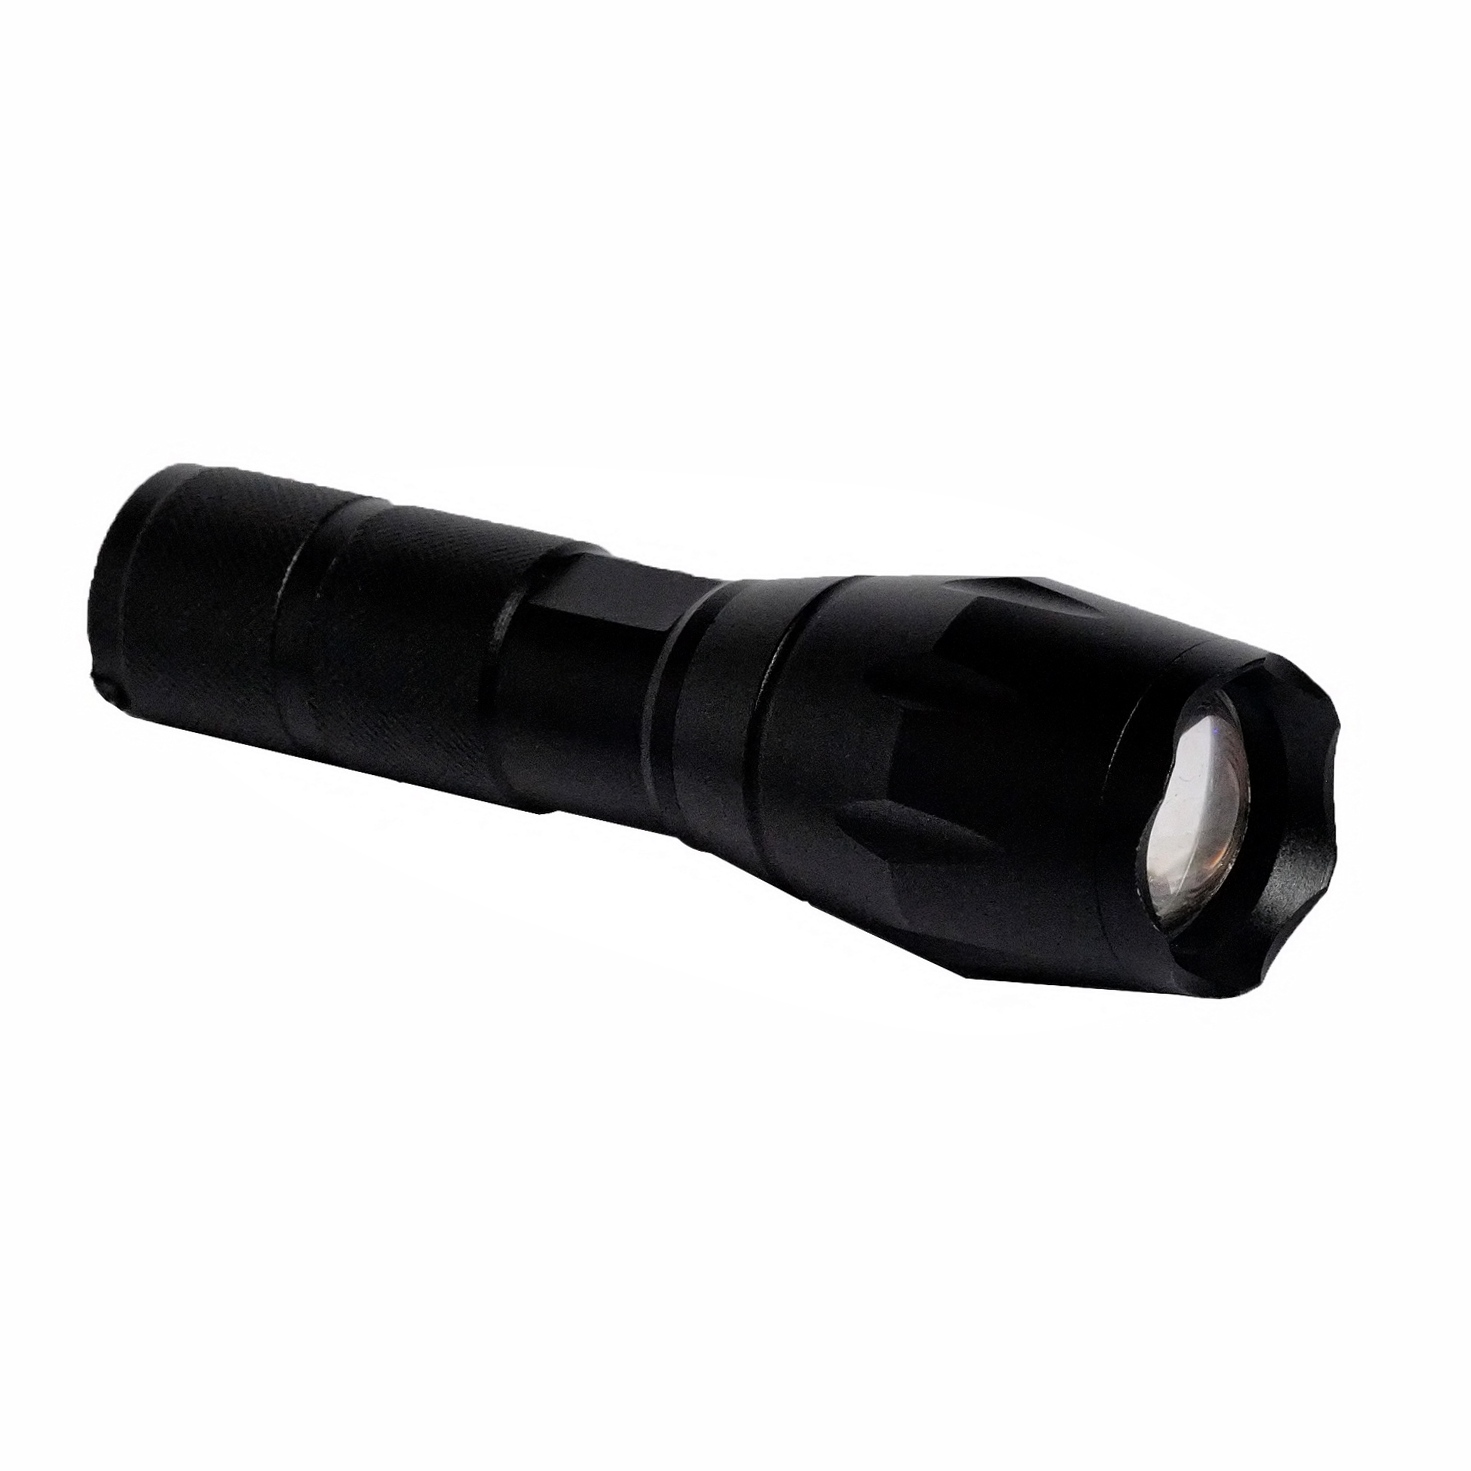 LANTERNA LED SPACER, (CREE T6), 200 lumen, zoom, tailcap switch, battery: 18650 or 3xAAA "SP-LED-LAMP" (include TV 0.18lei) thumb